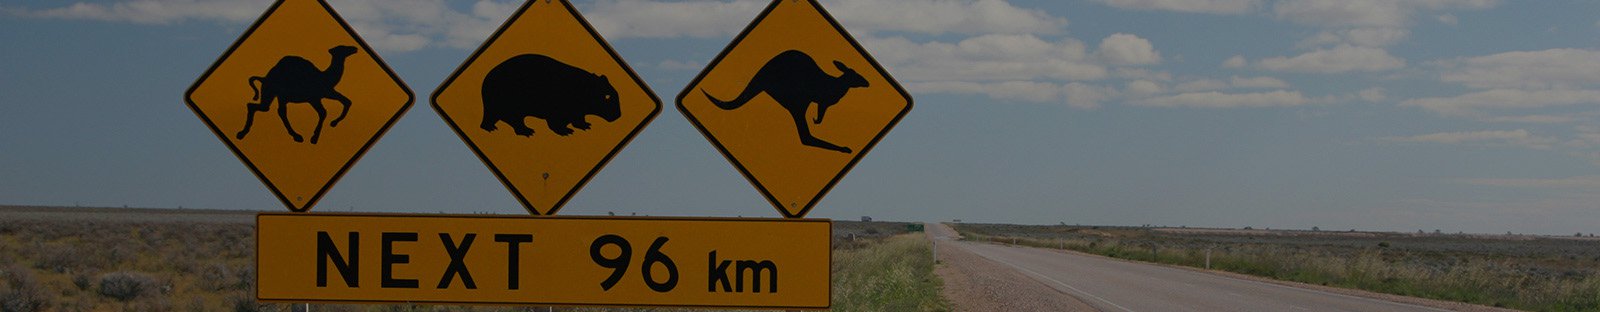 Wildlife warning sign on outback road